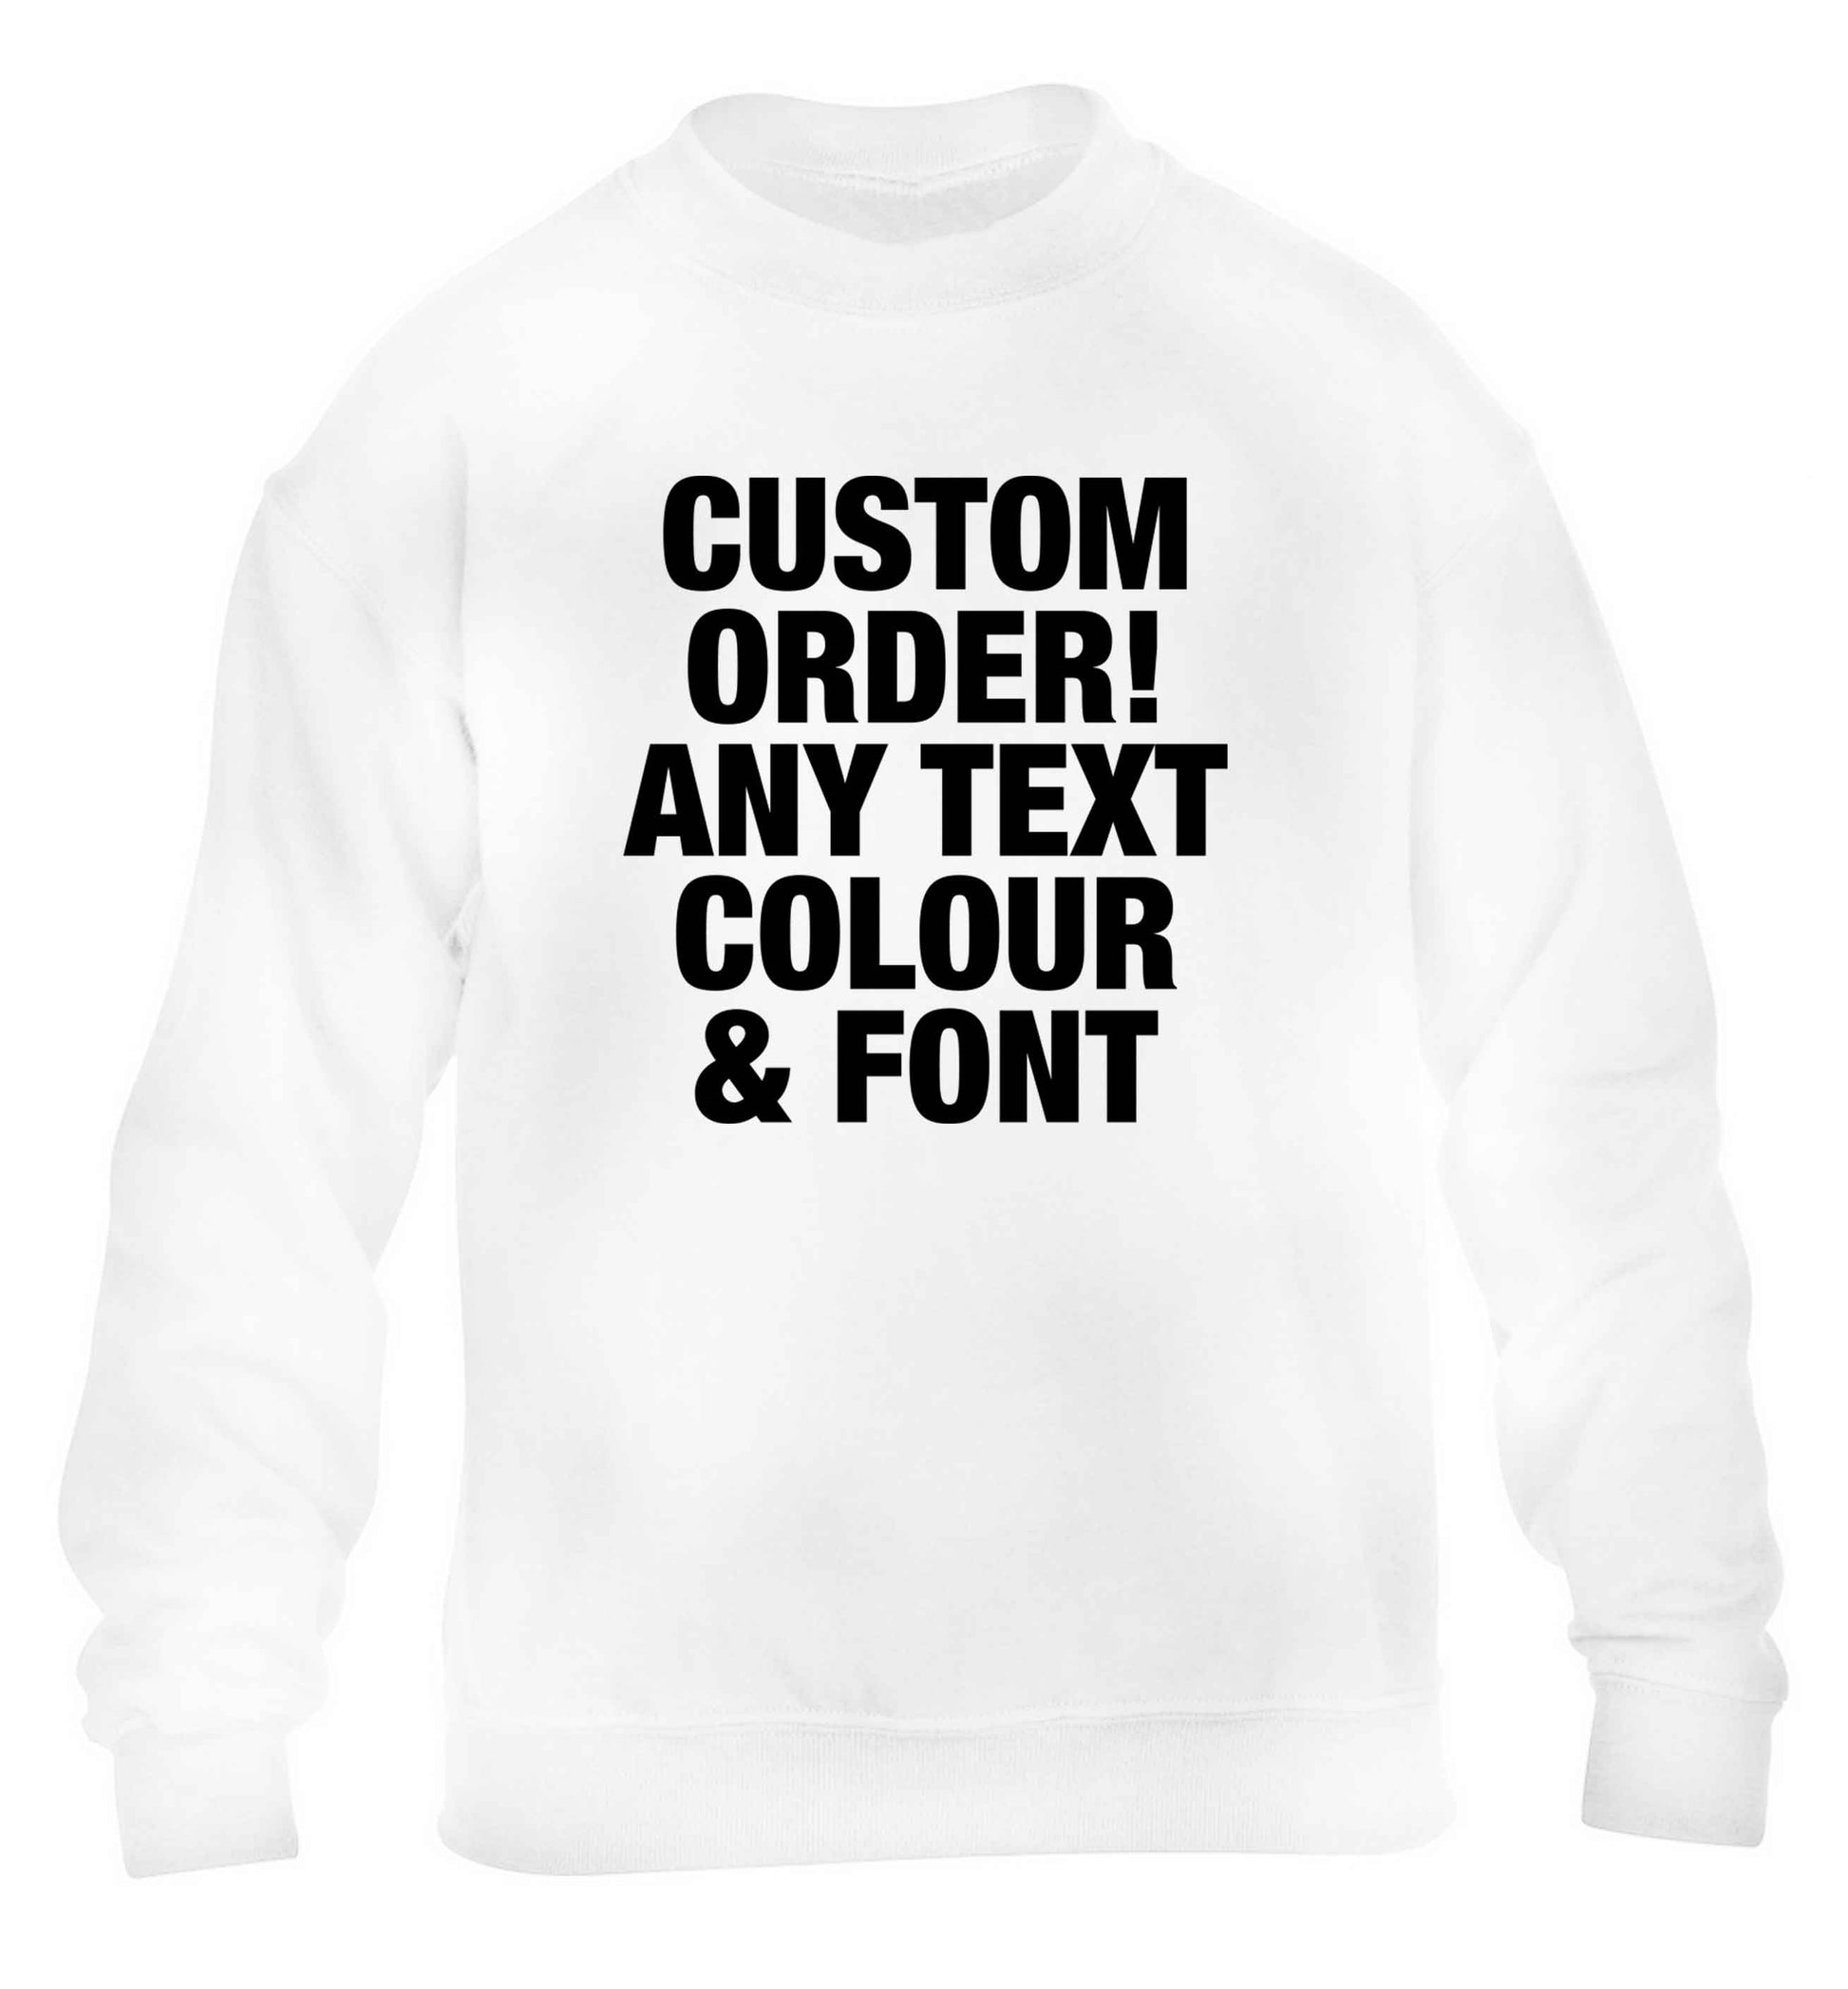 Custom order any text colour and font children's white sweater 12-13 Years